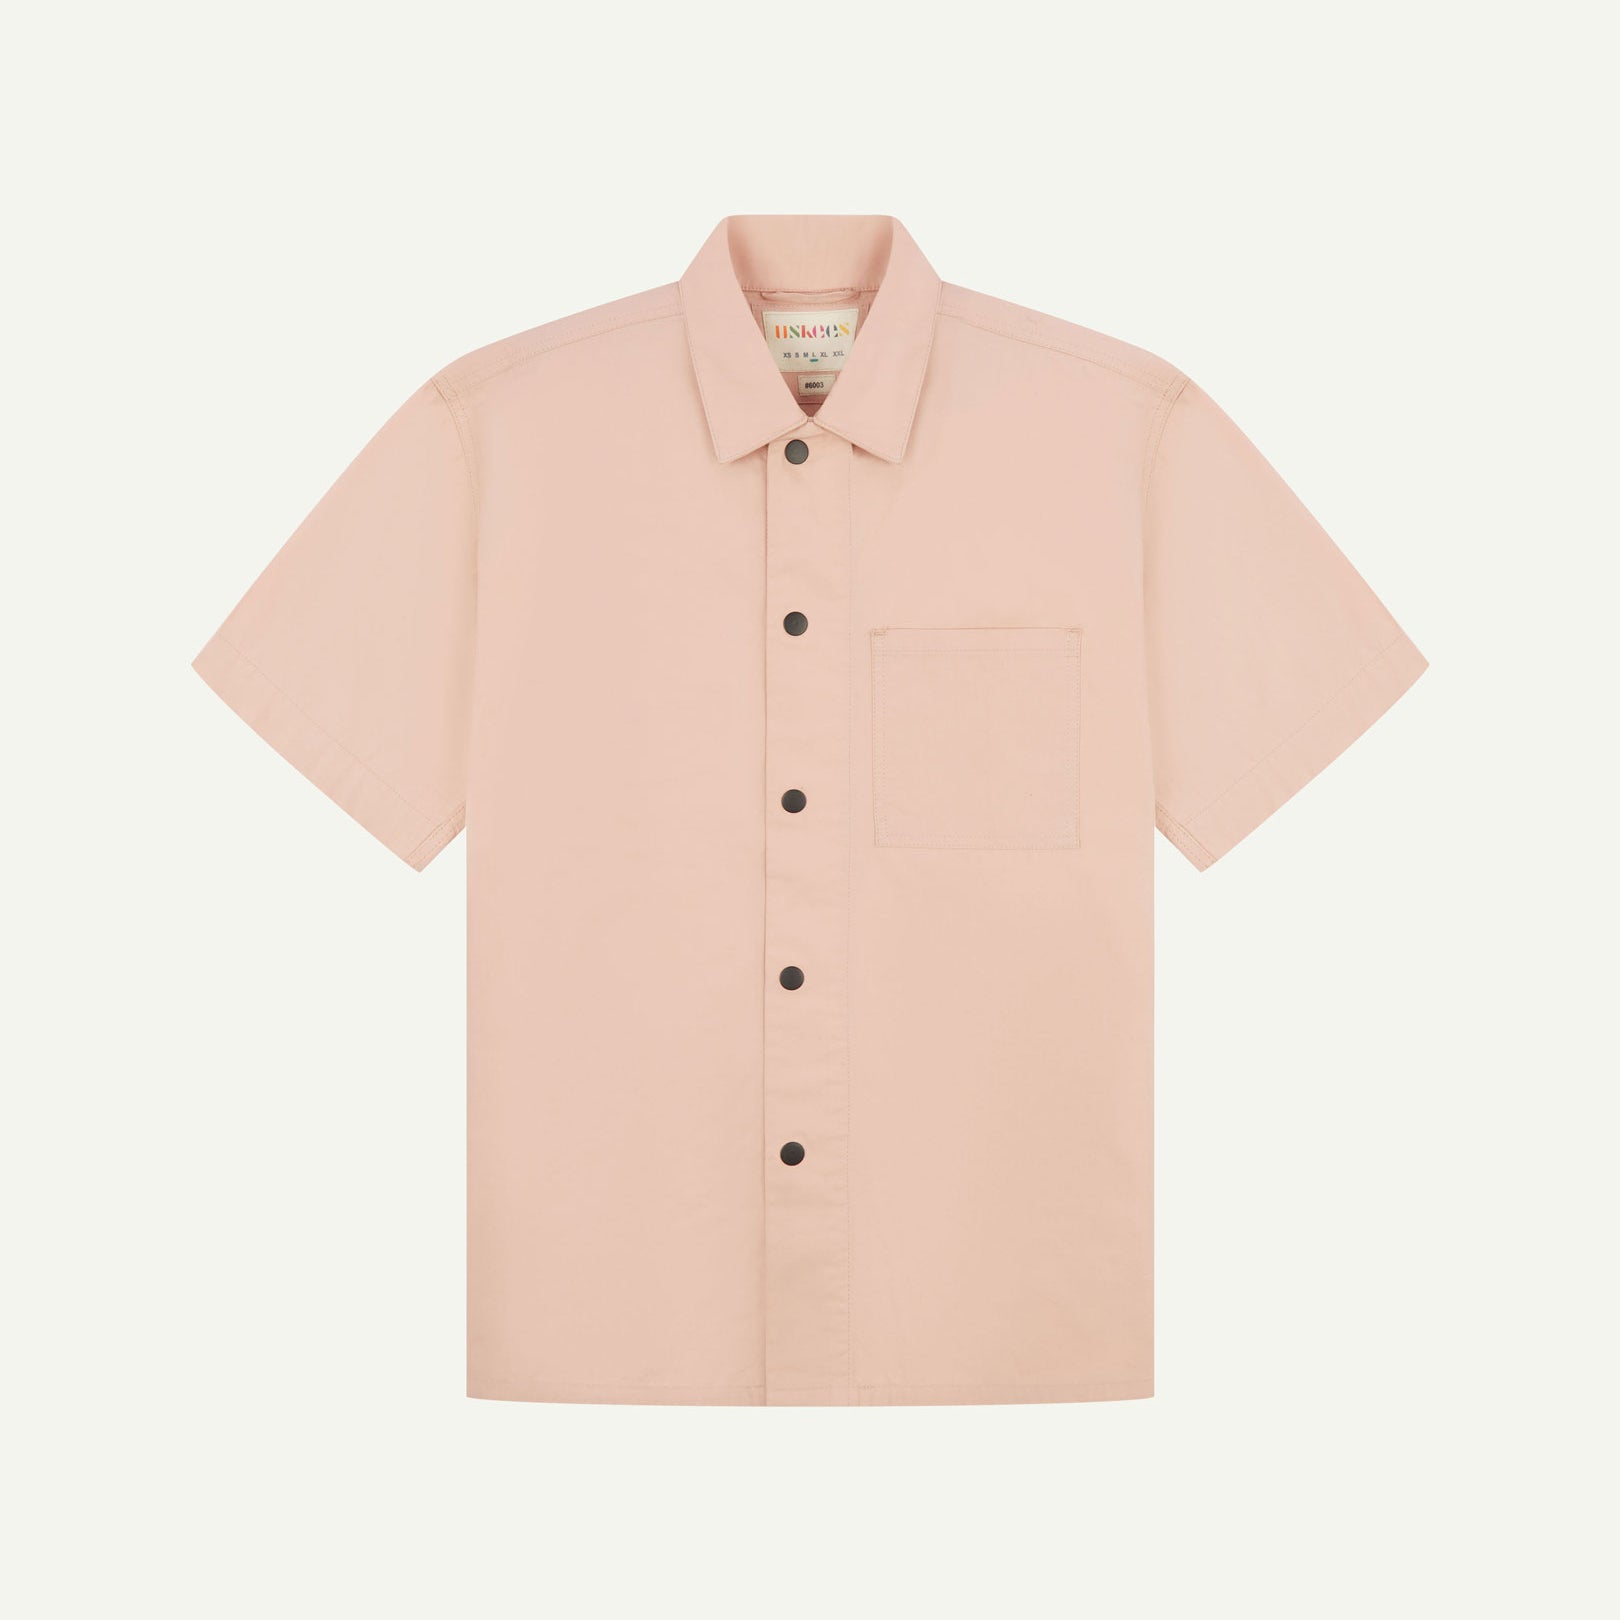 Front flat view of dusty pink buttoned organic cotton lightweight short sleeve shirt from Uskees.